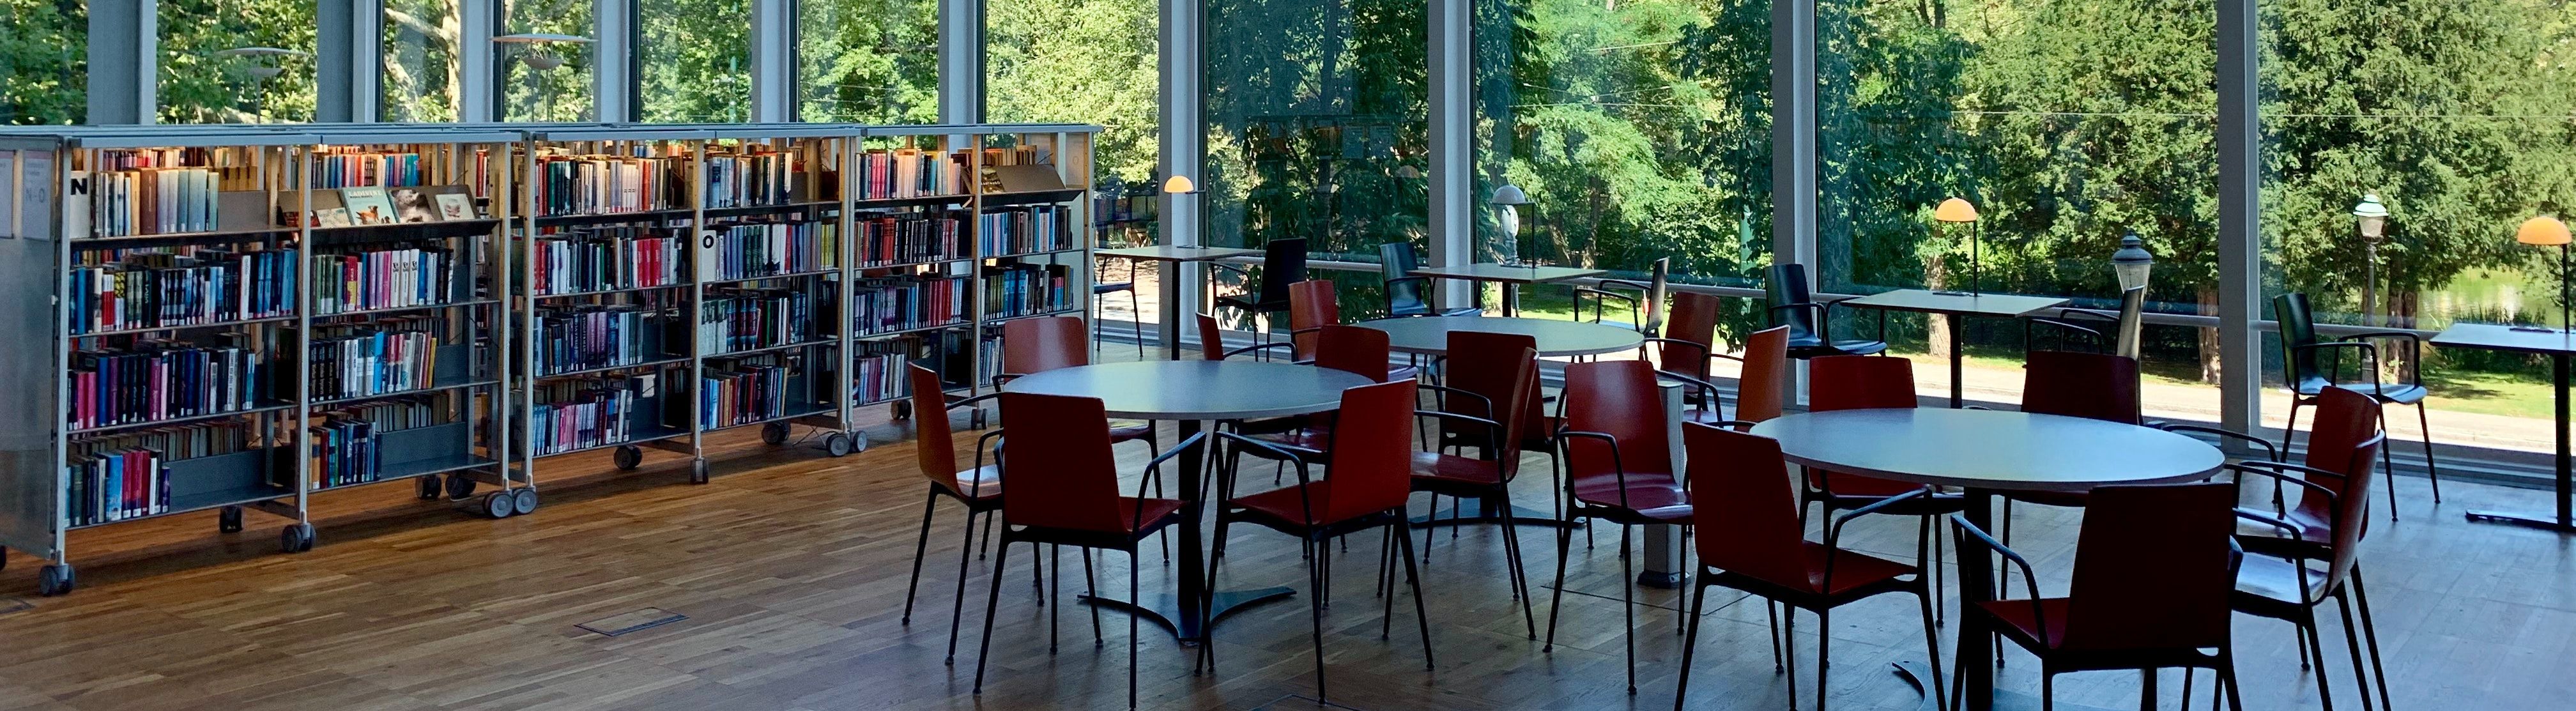 School library with tables